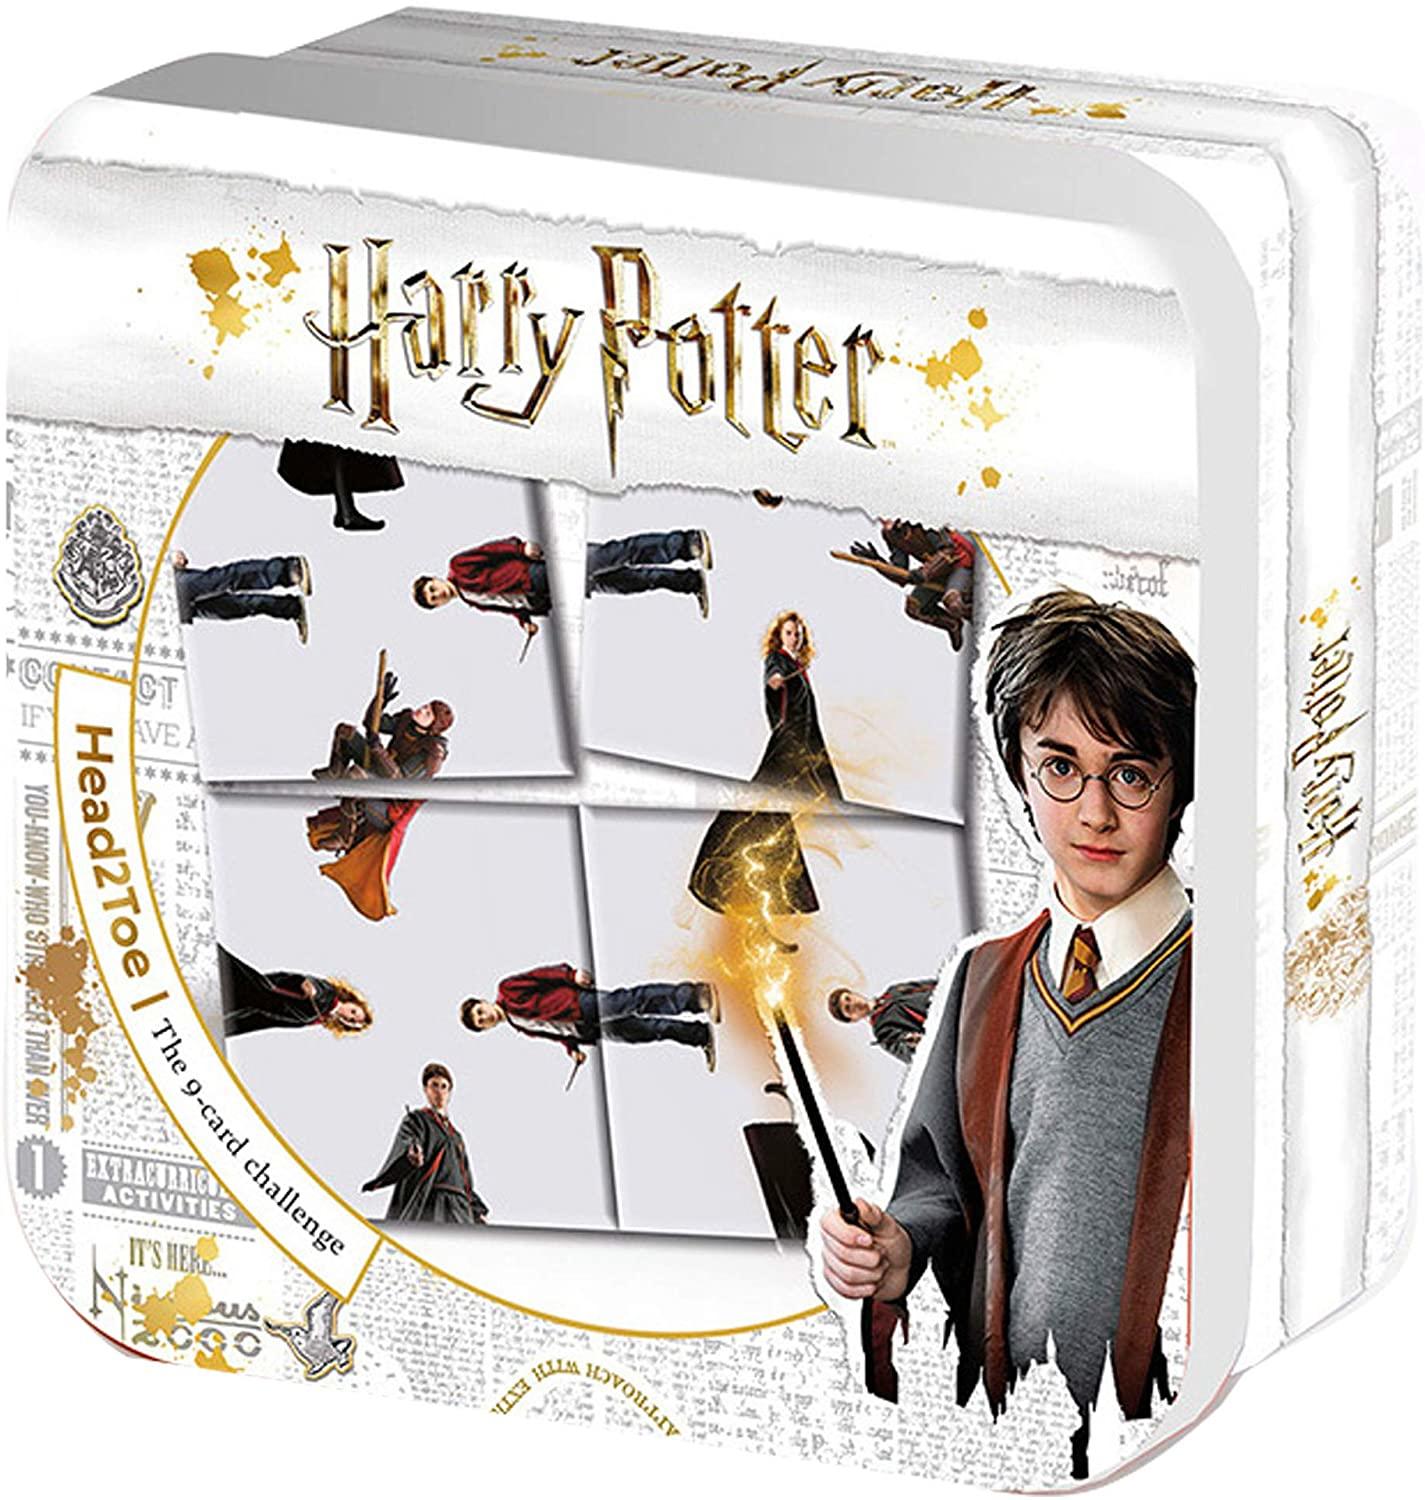 White rectangular tin box with gold coloured decoration containing Harry Potter top to toe puzzle. There is a picture of Harry Potter in the right corner holding his wand.